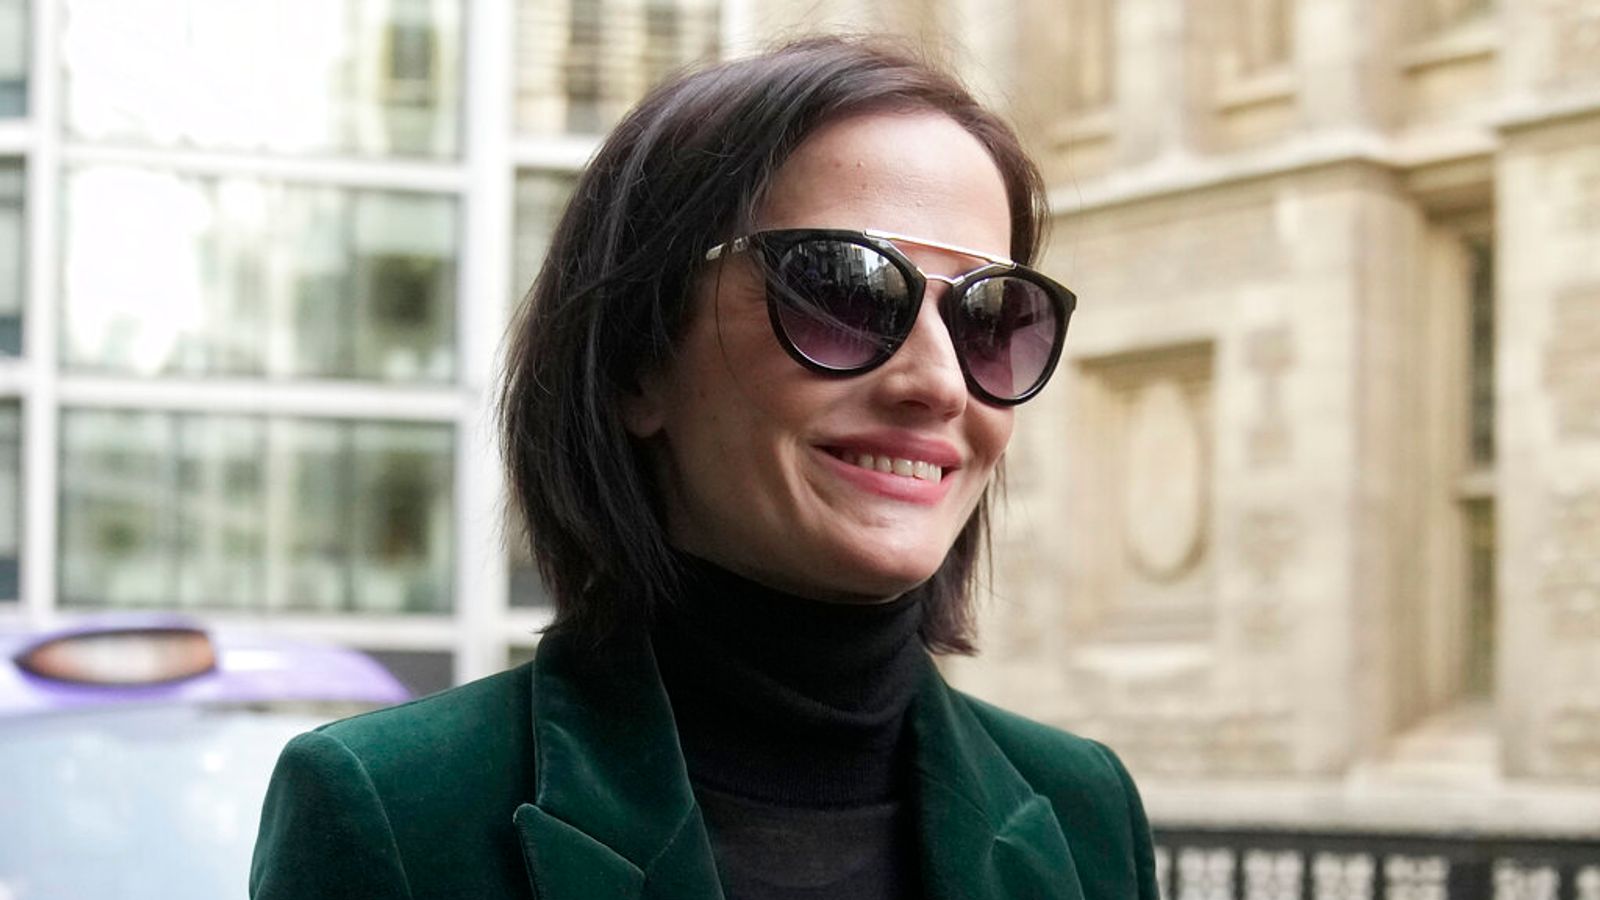 Eva Green 'contemplated faking a broken arm' to avoid appearing in film, High Court told